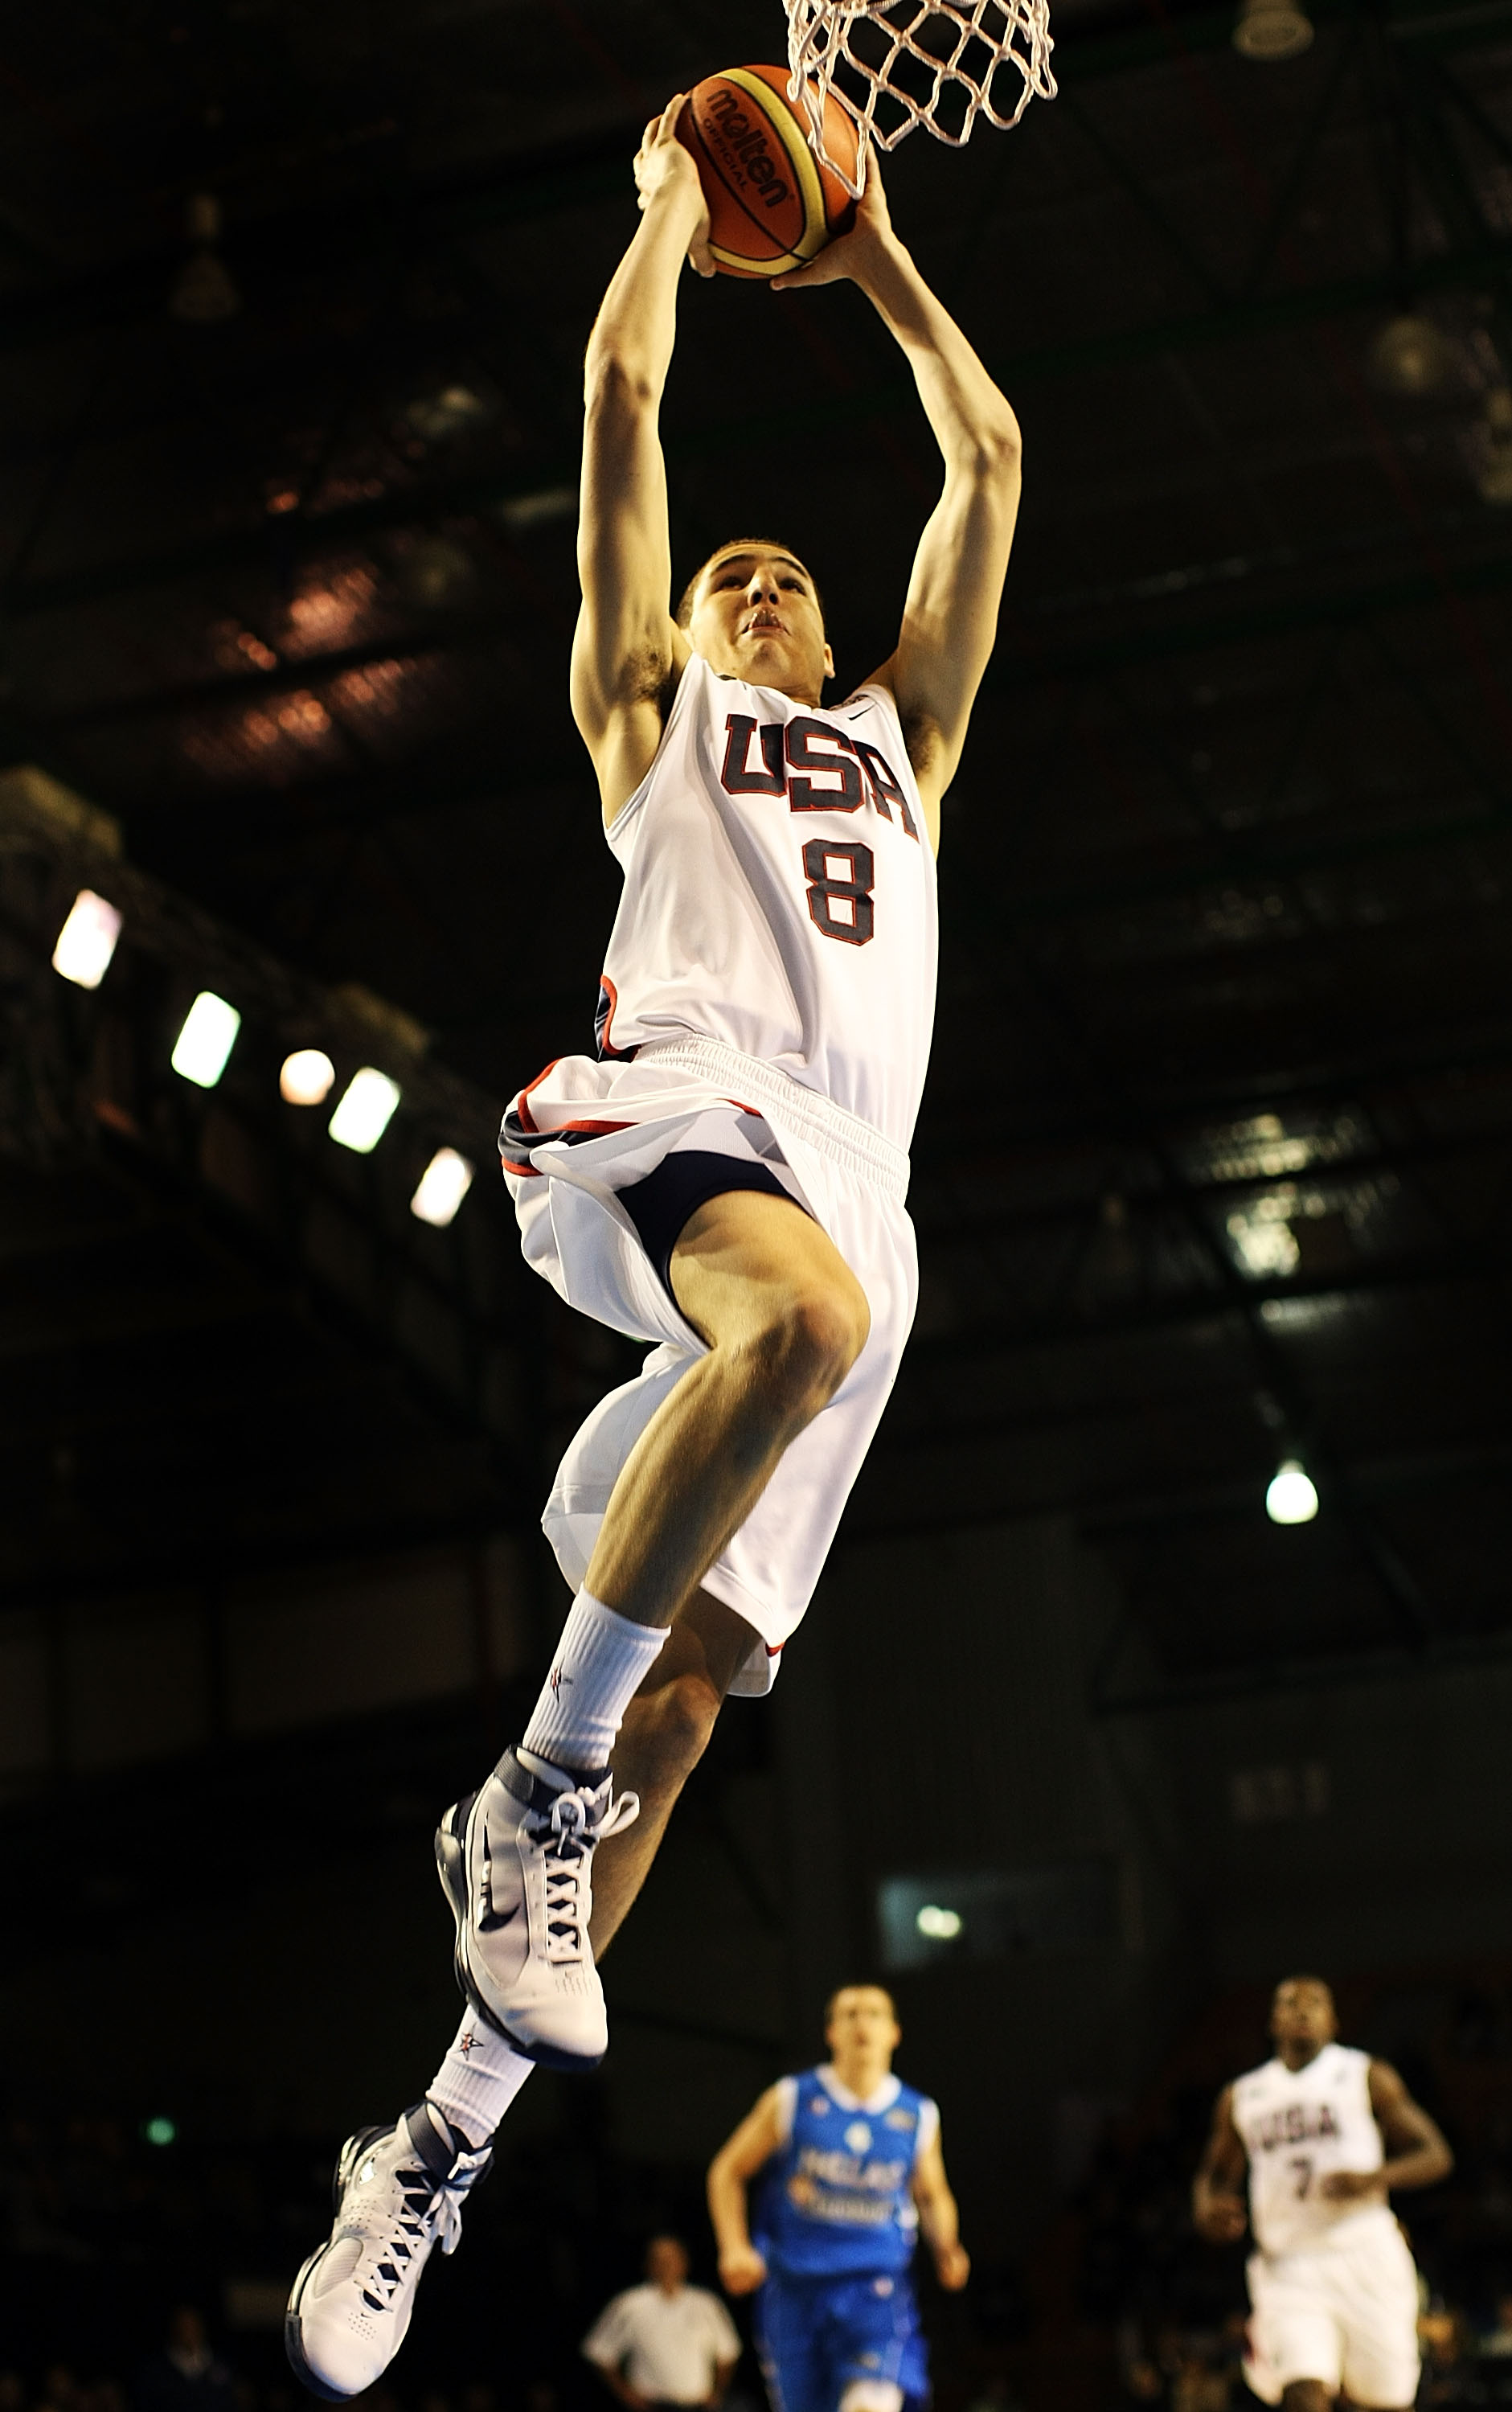 AUCKLAND, NEW ZEALAND - JULY 06:  Klay Thompson of the United States dunks the ball during the U19 Basketball World Championships match between the United States and Greece at North Shore Events Centre on July 6, 2009 in Auckland, New Zealand.  (Photo by